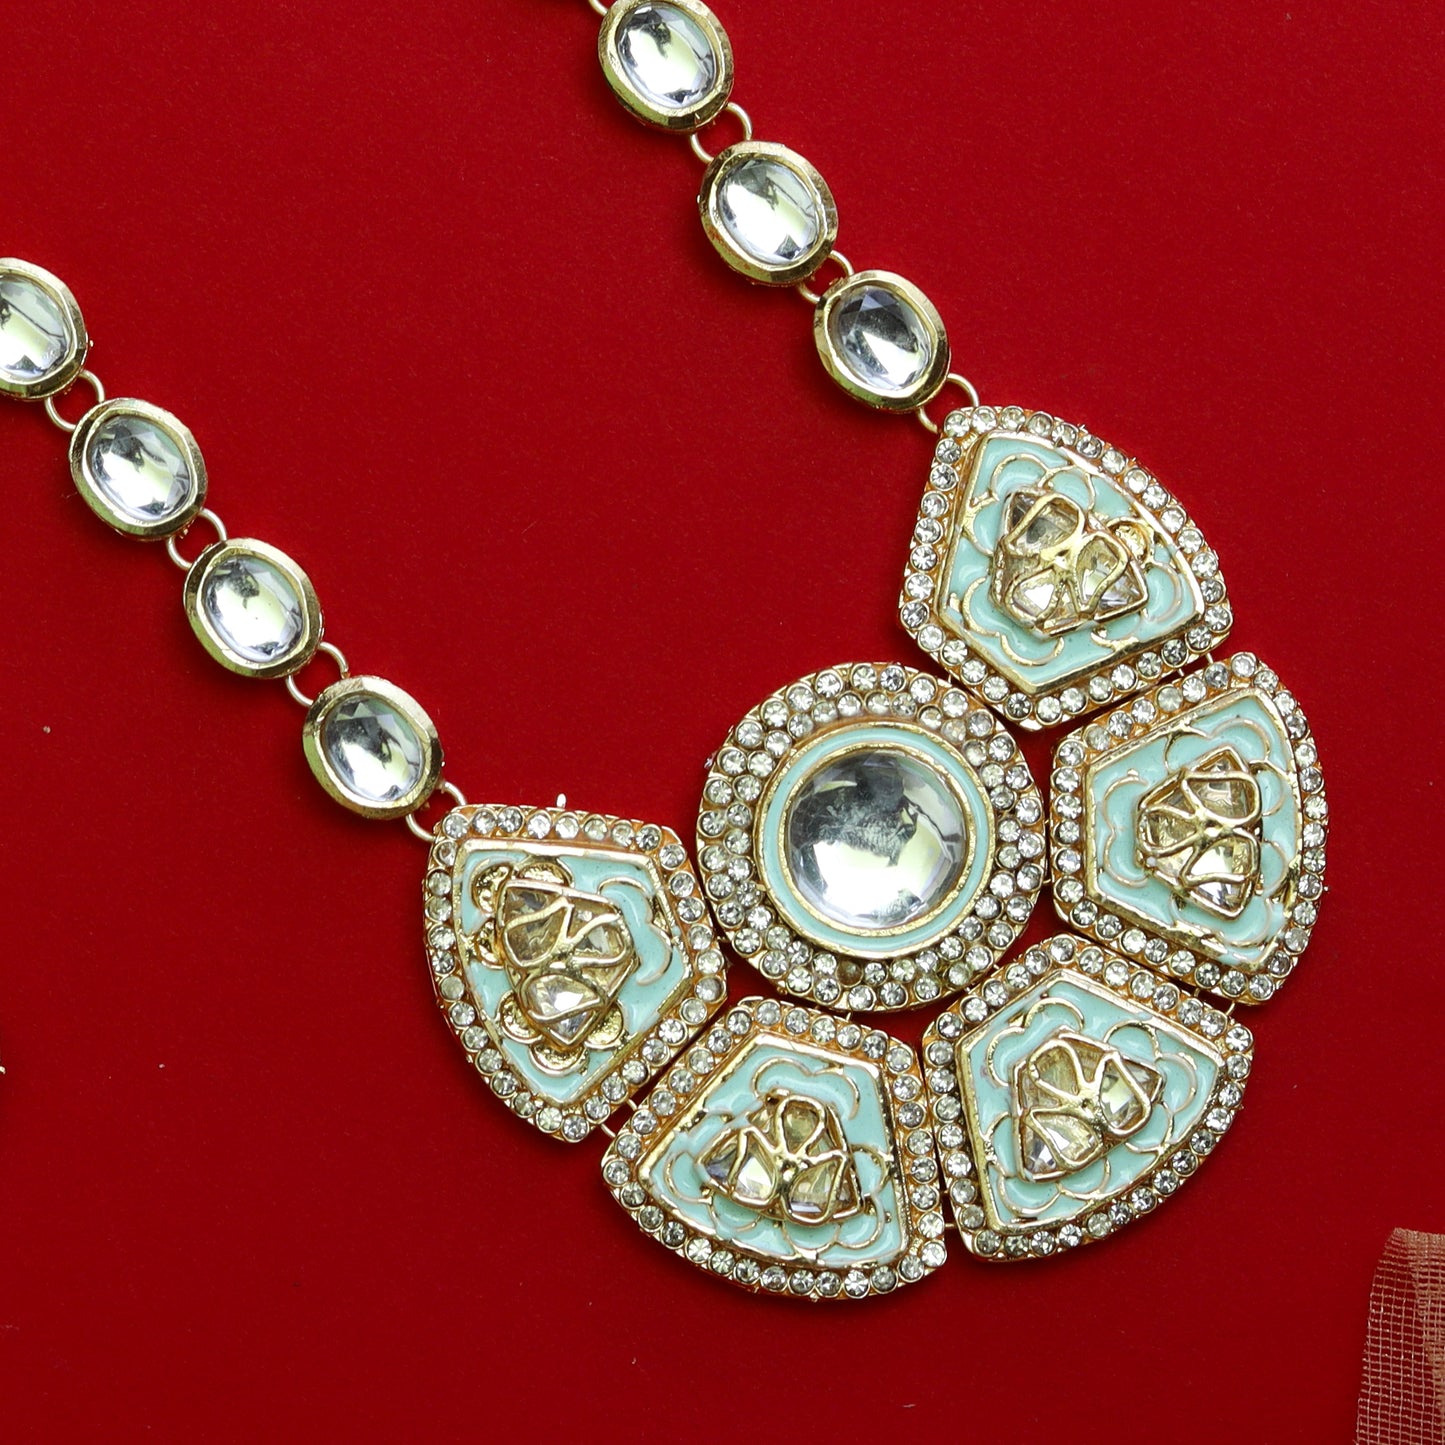 Sanvi Necklace set with Earrings in mint